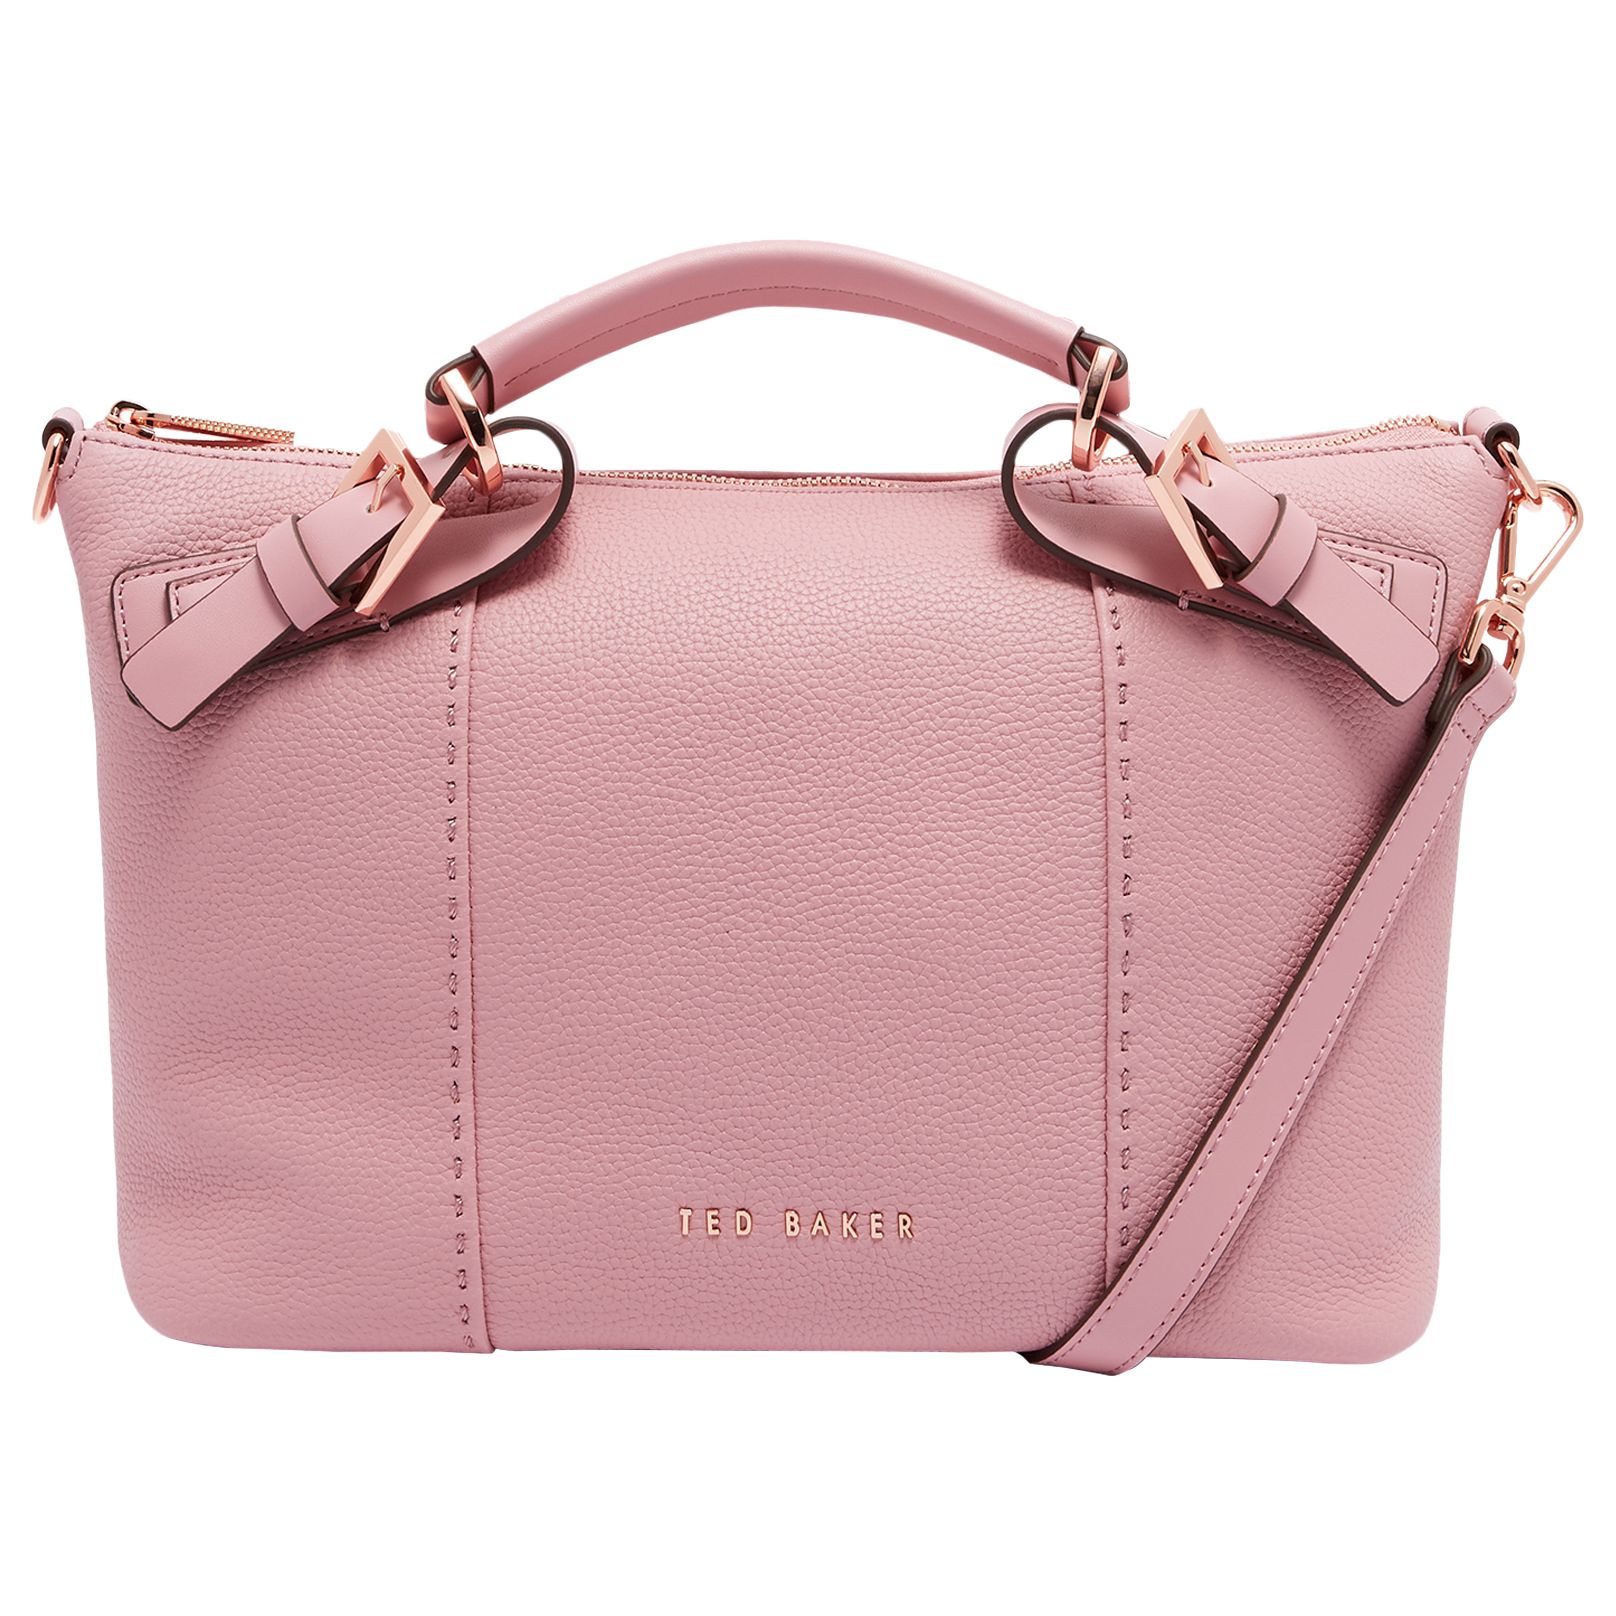 Ted Baker Salbett Pop Hand Leather Small Tote Bag at John Lewis & Partners